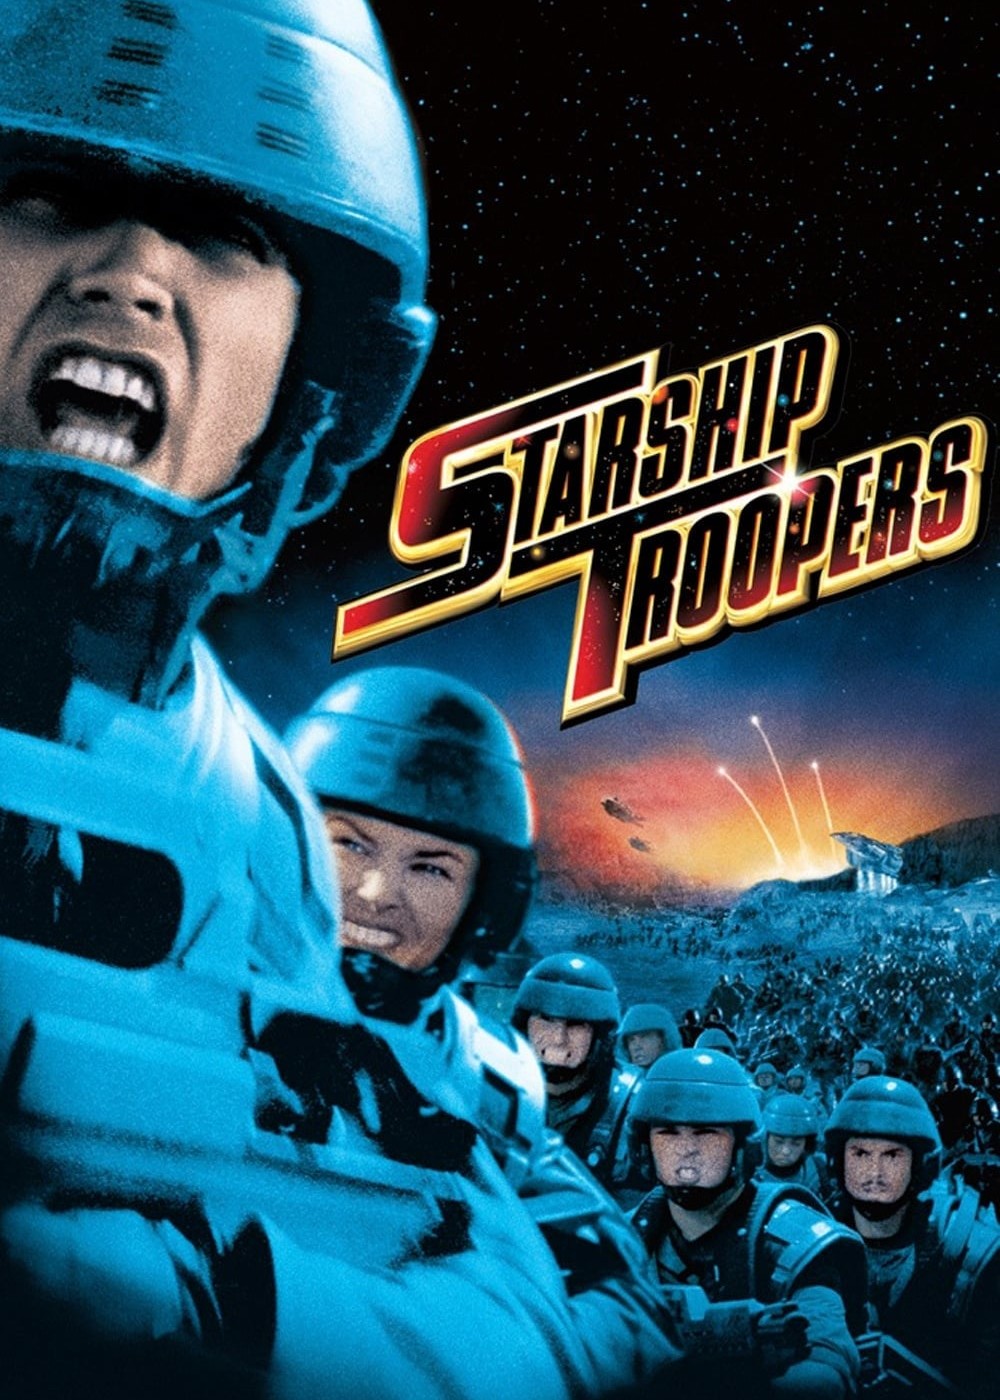 Starship Troopers - Starship Troopers